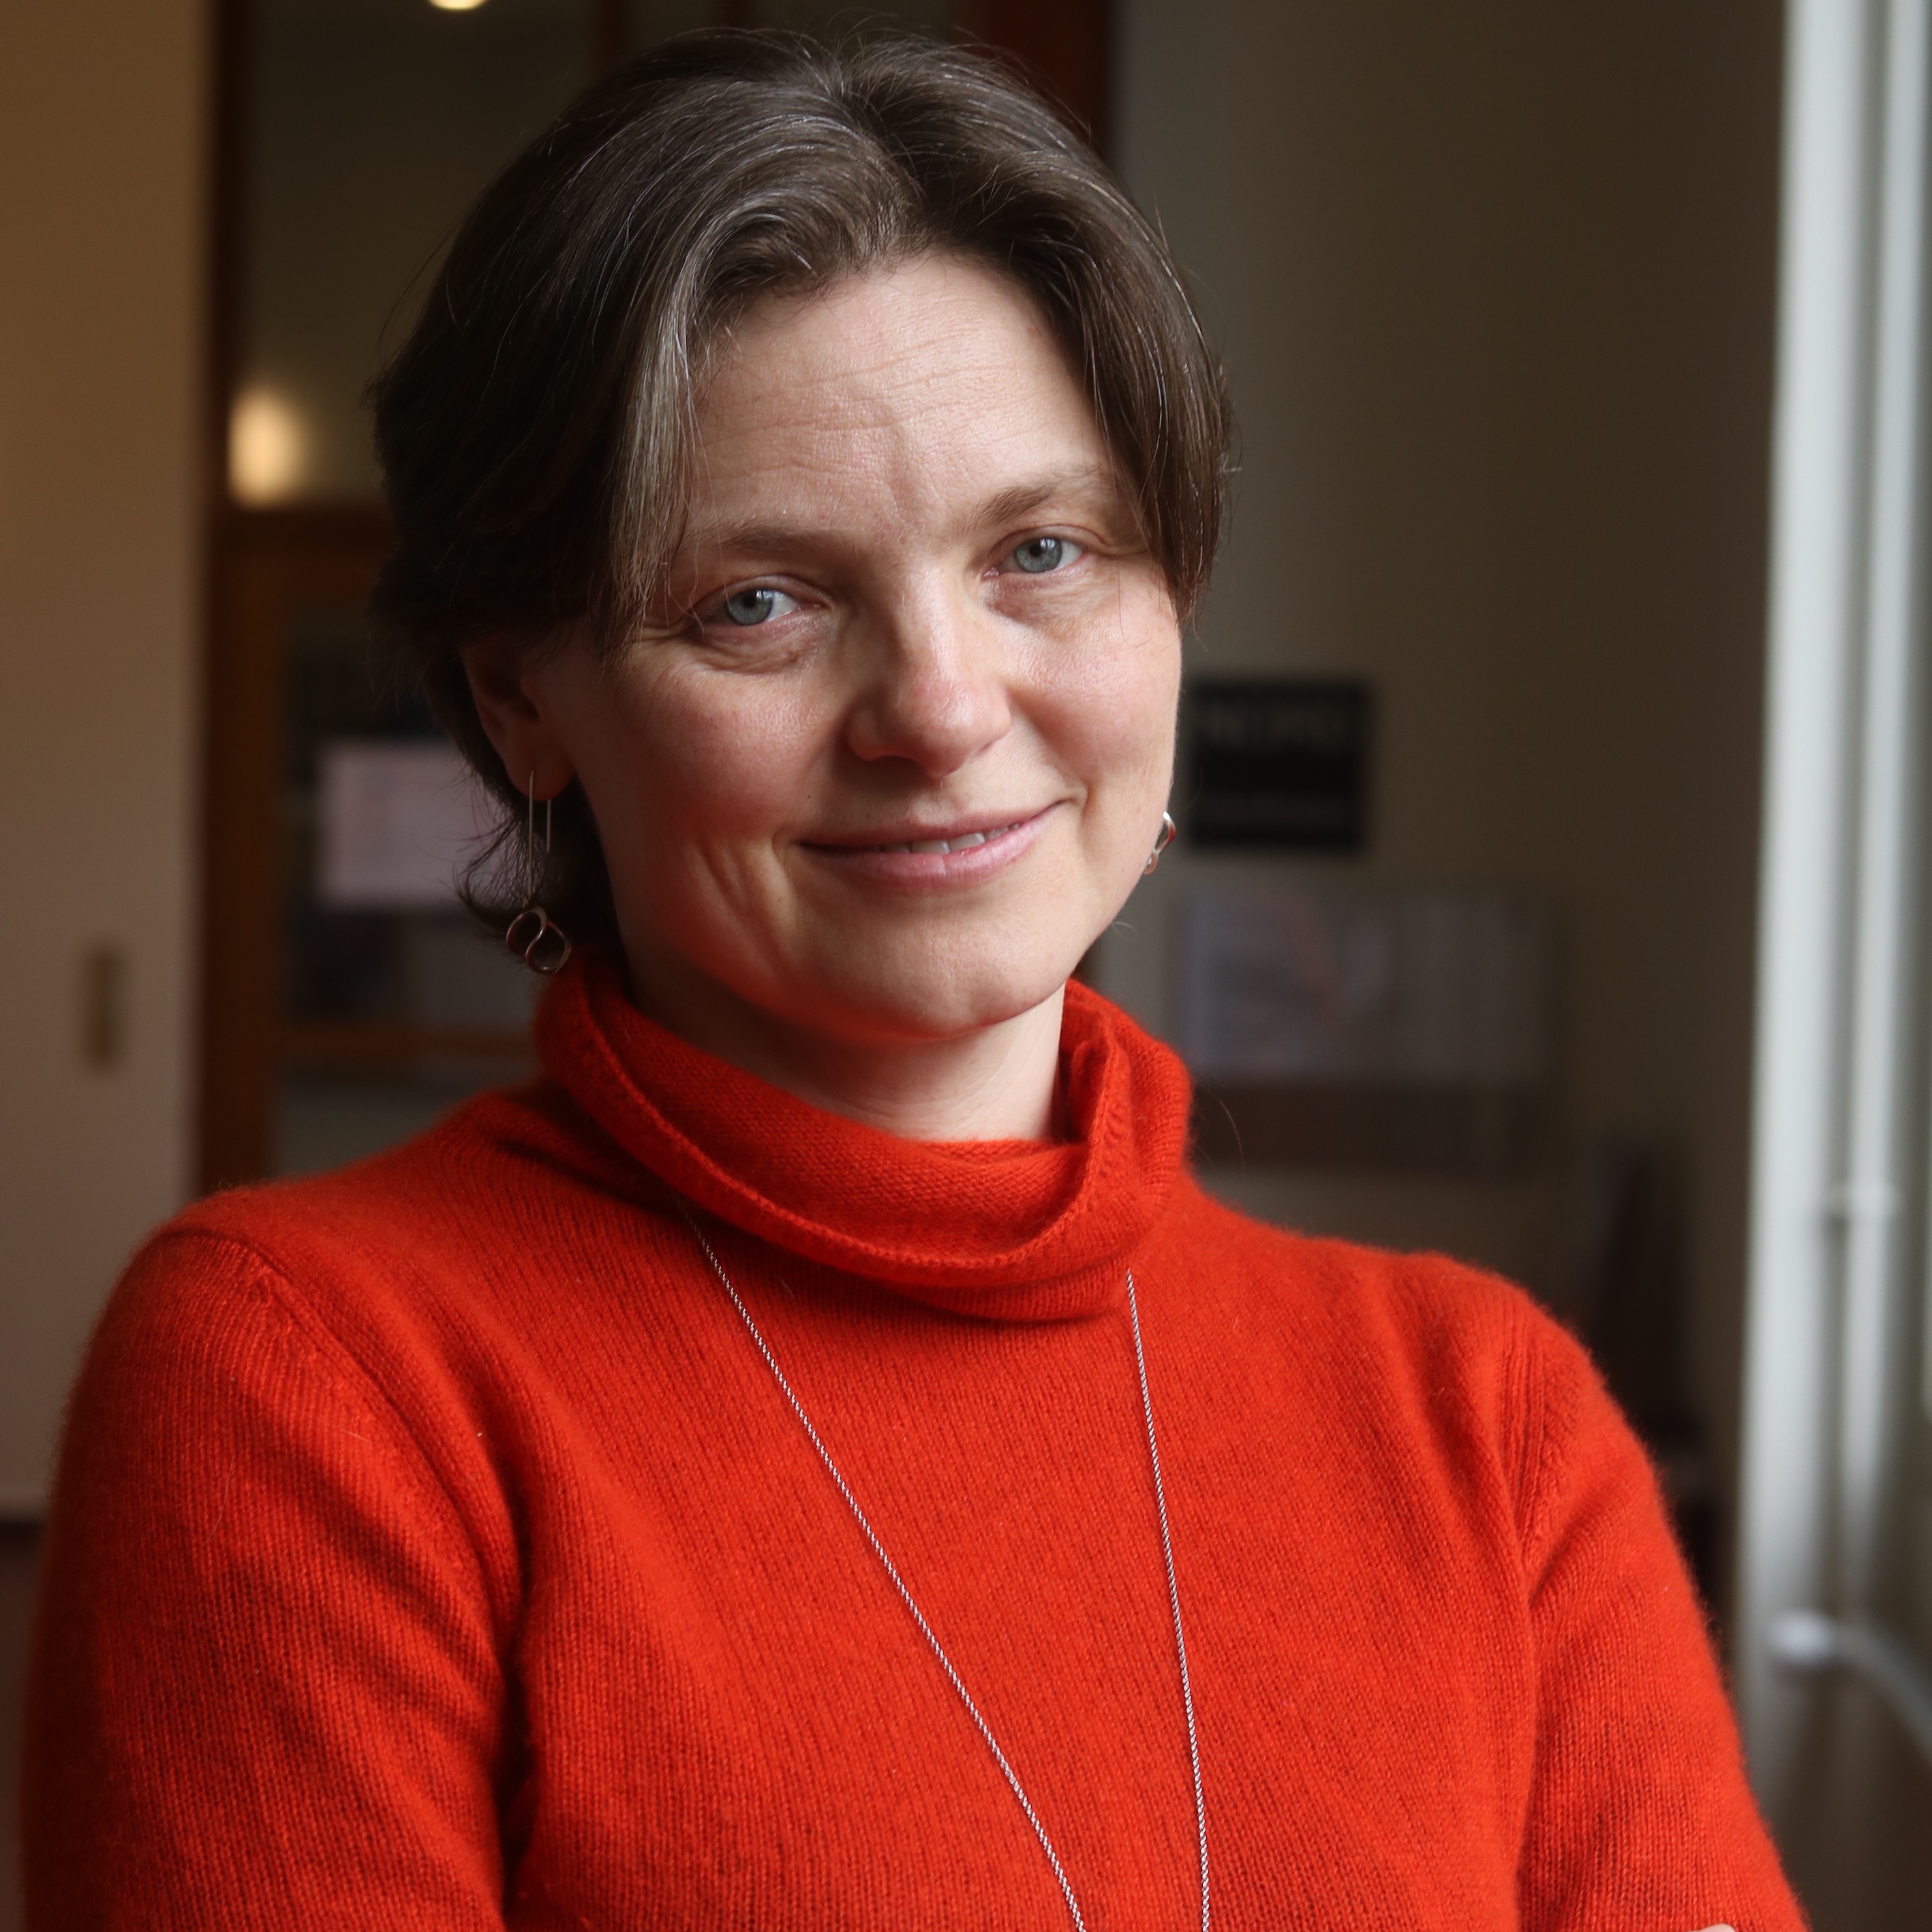 Photo of Irina Shklovsk wearing a red turtle neck and smiling towards the camera.